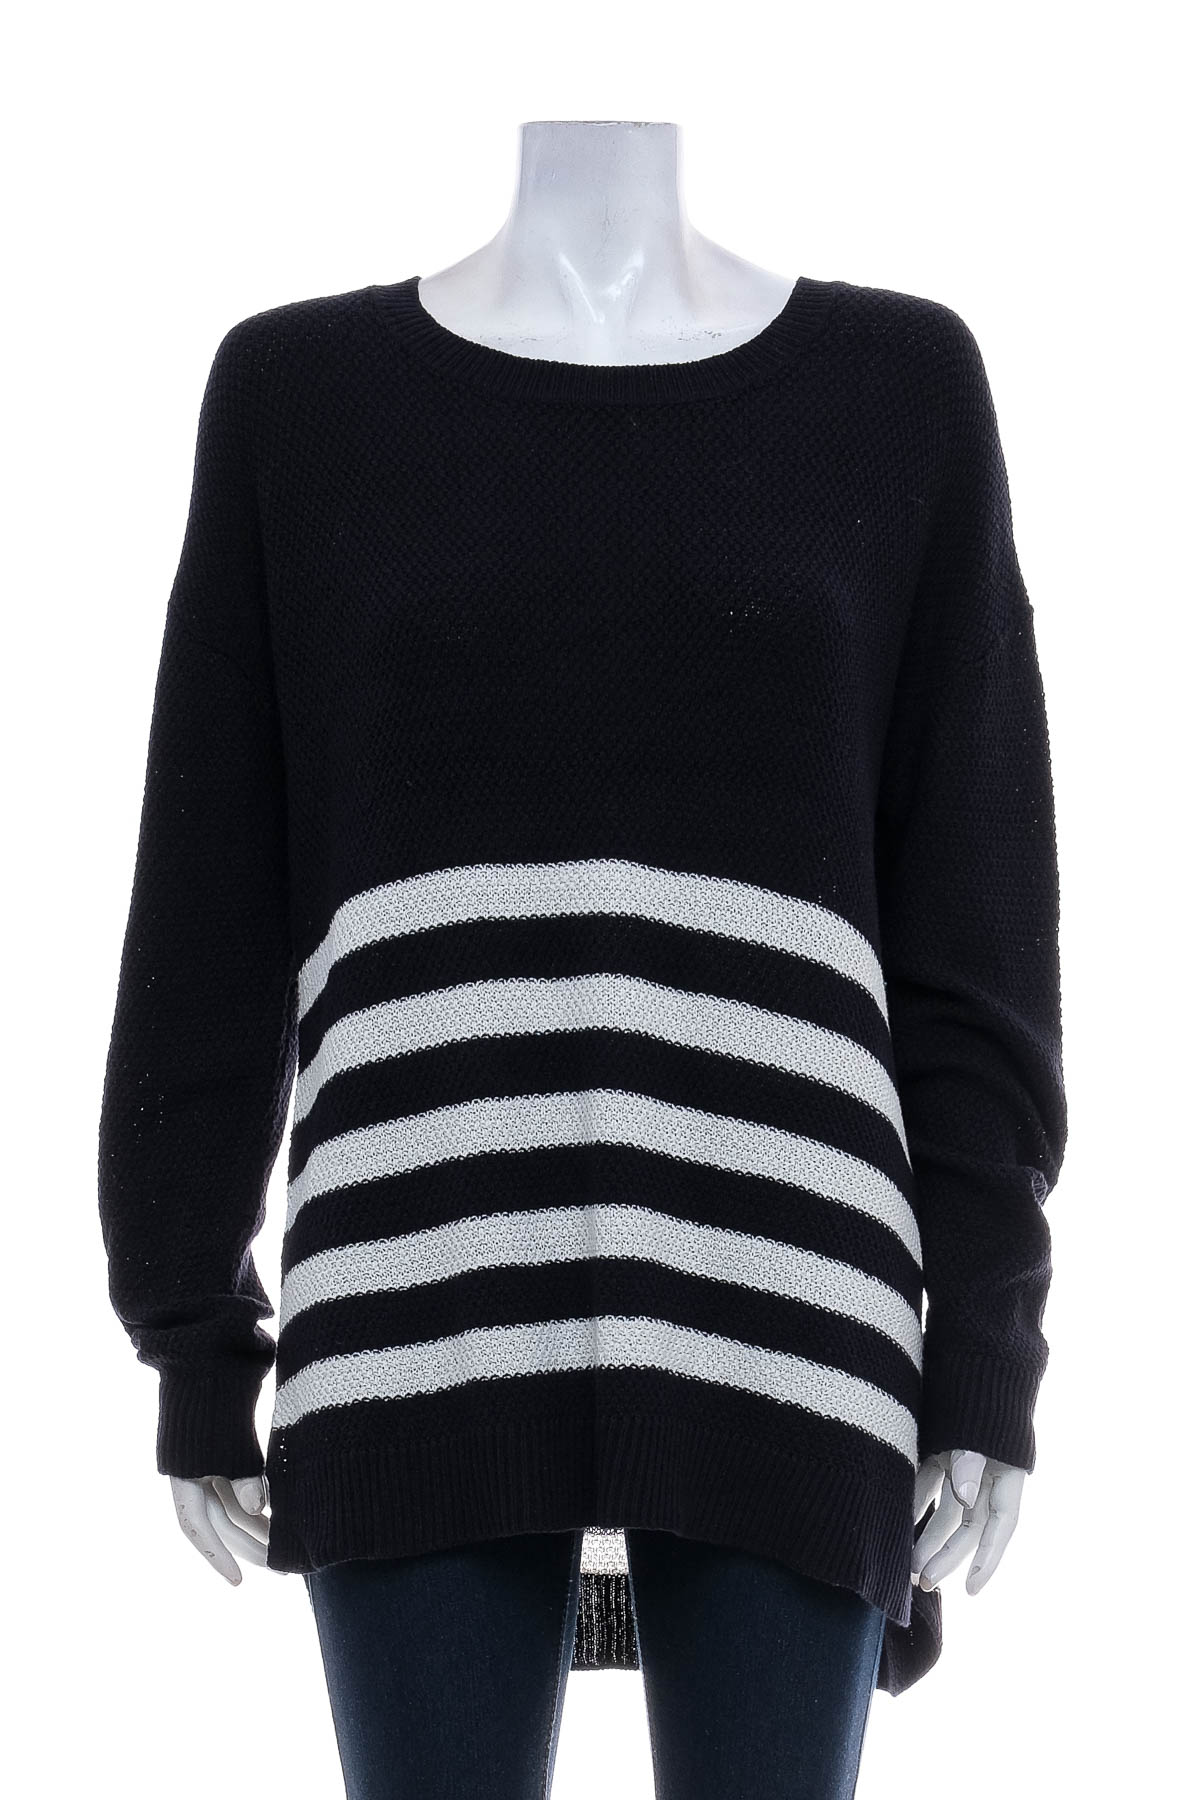 Women's sweater - Archy&Co. by COTTON:ON - 0